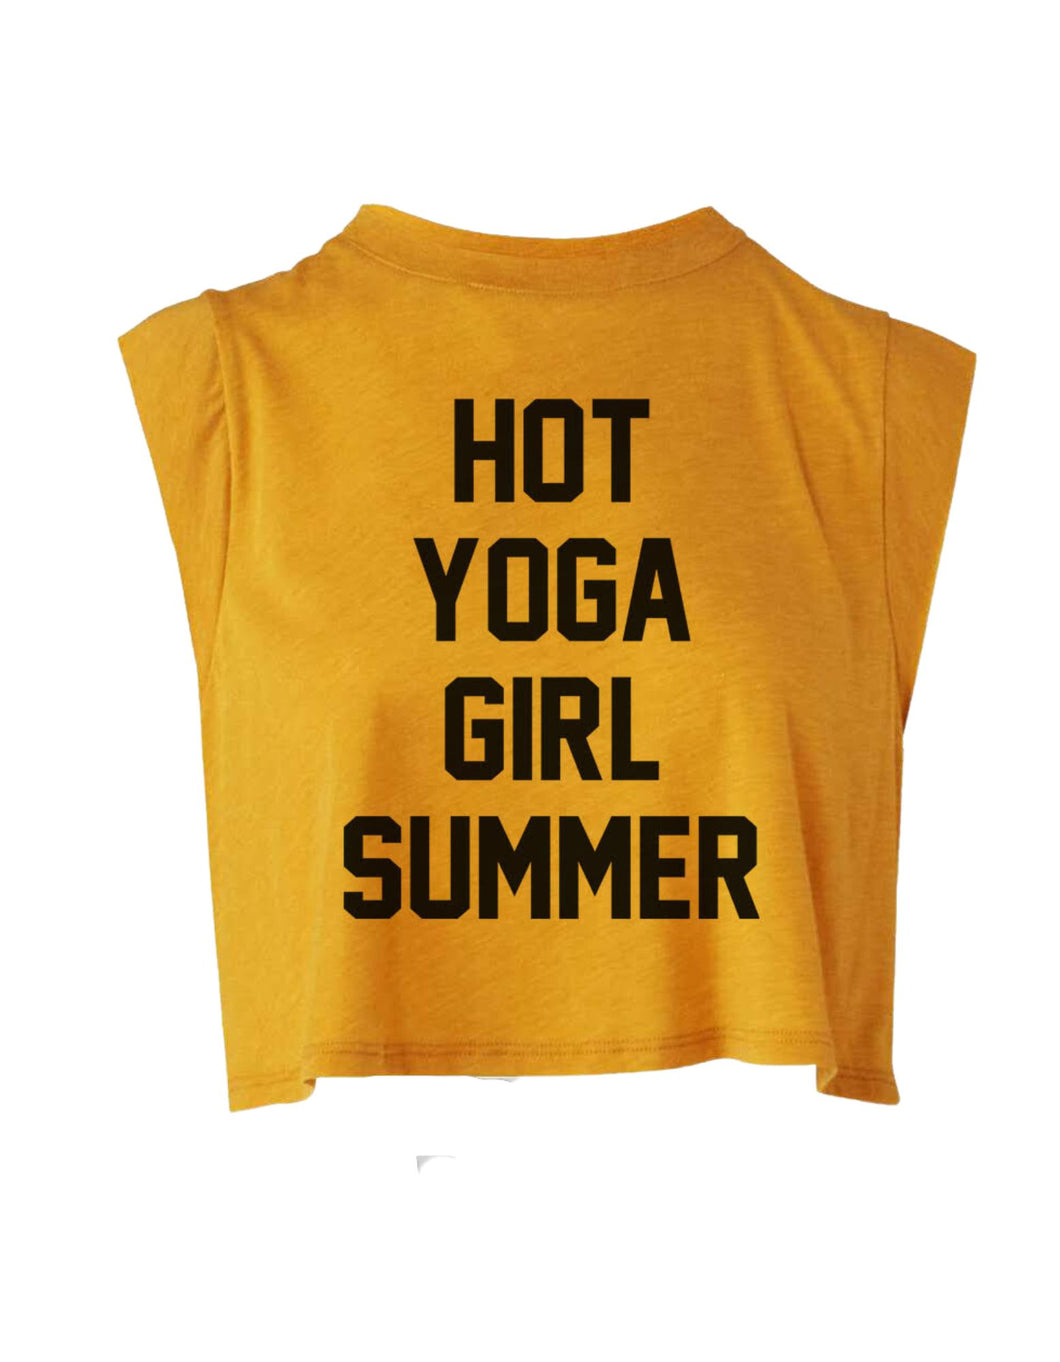 Mustard colored tank top with text 